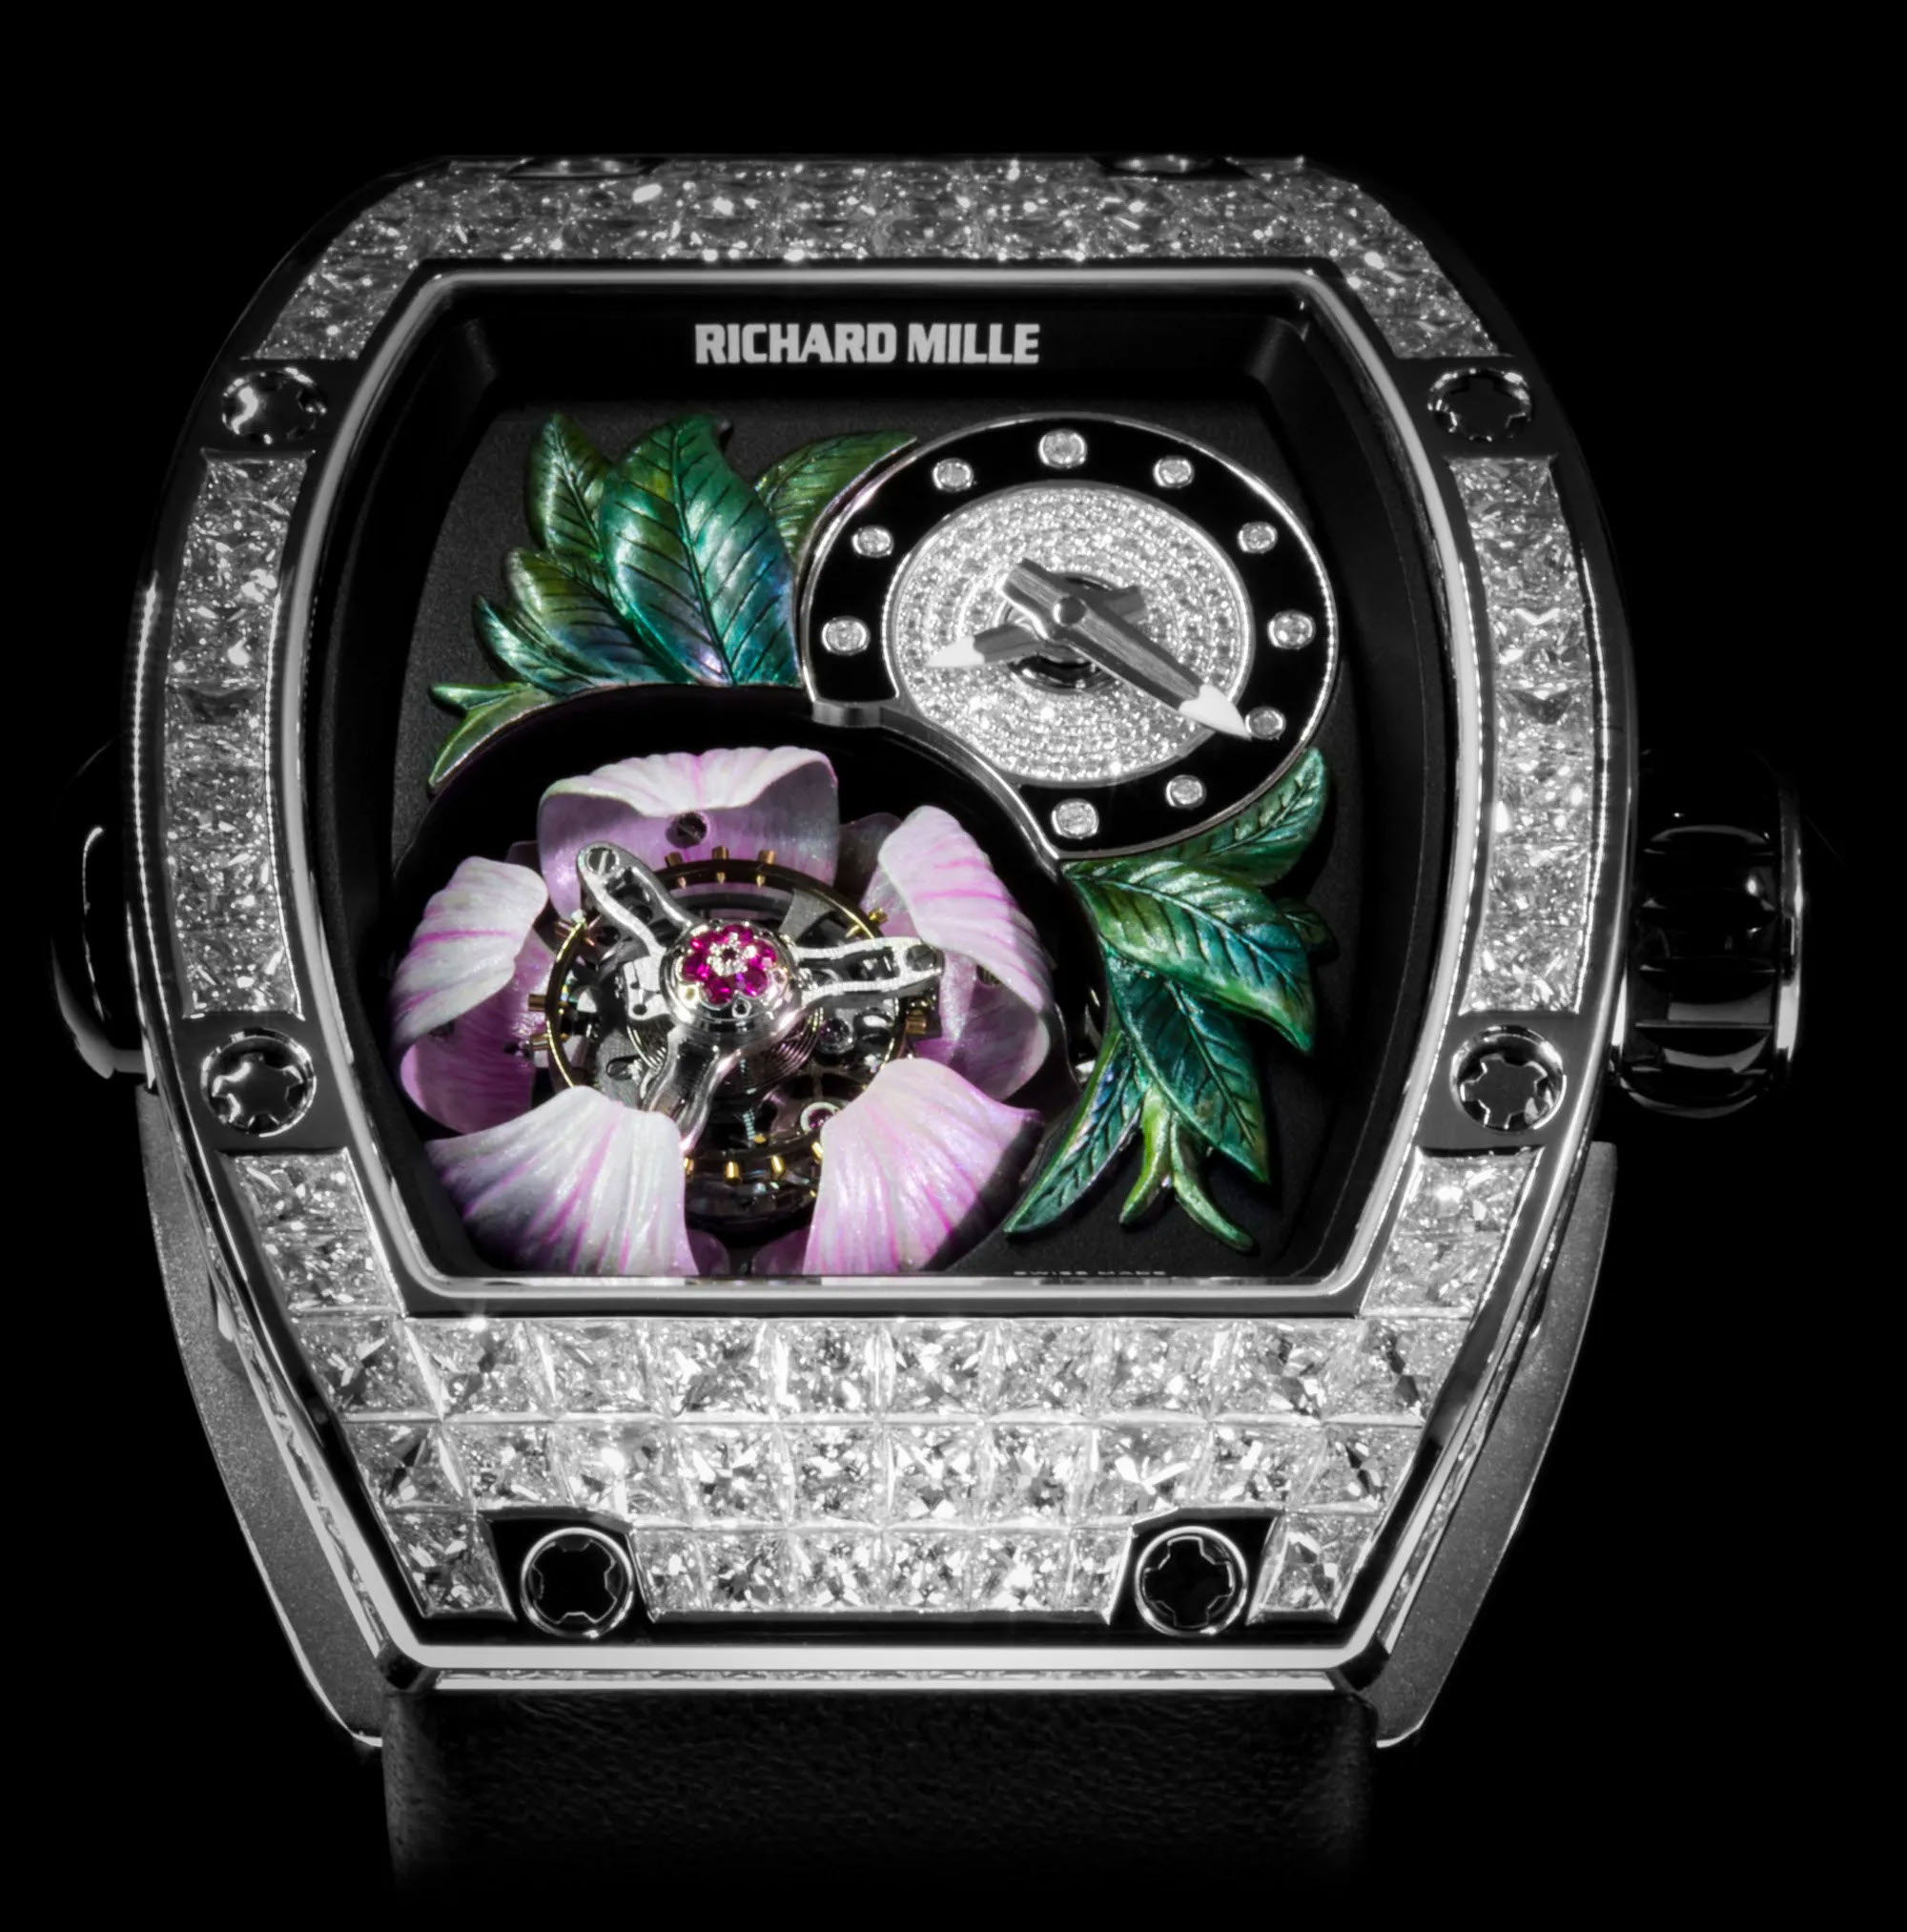 Louis Vuitton Has a Bunch Of Dope Watches Arriving in 2019 - The